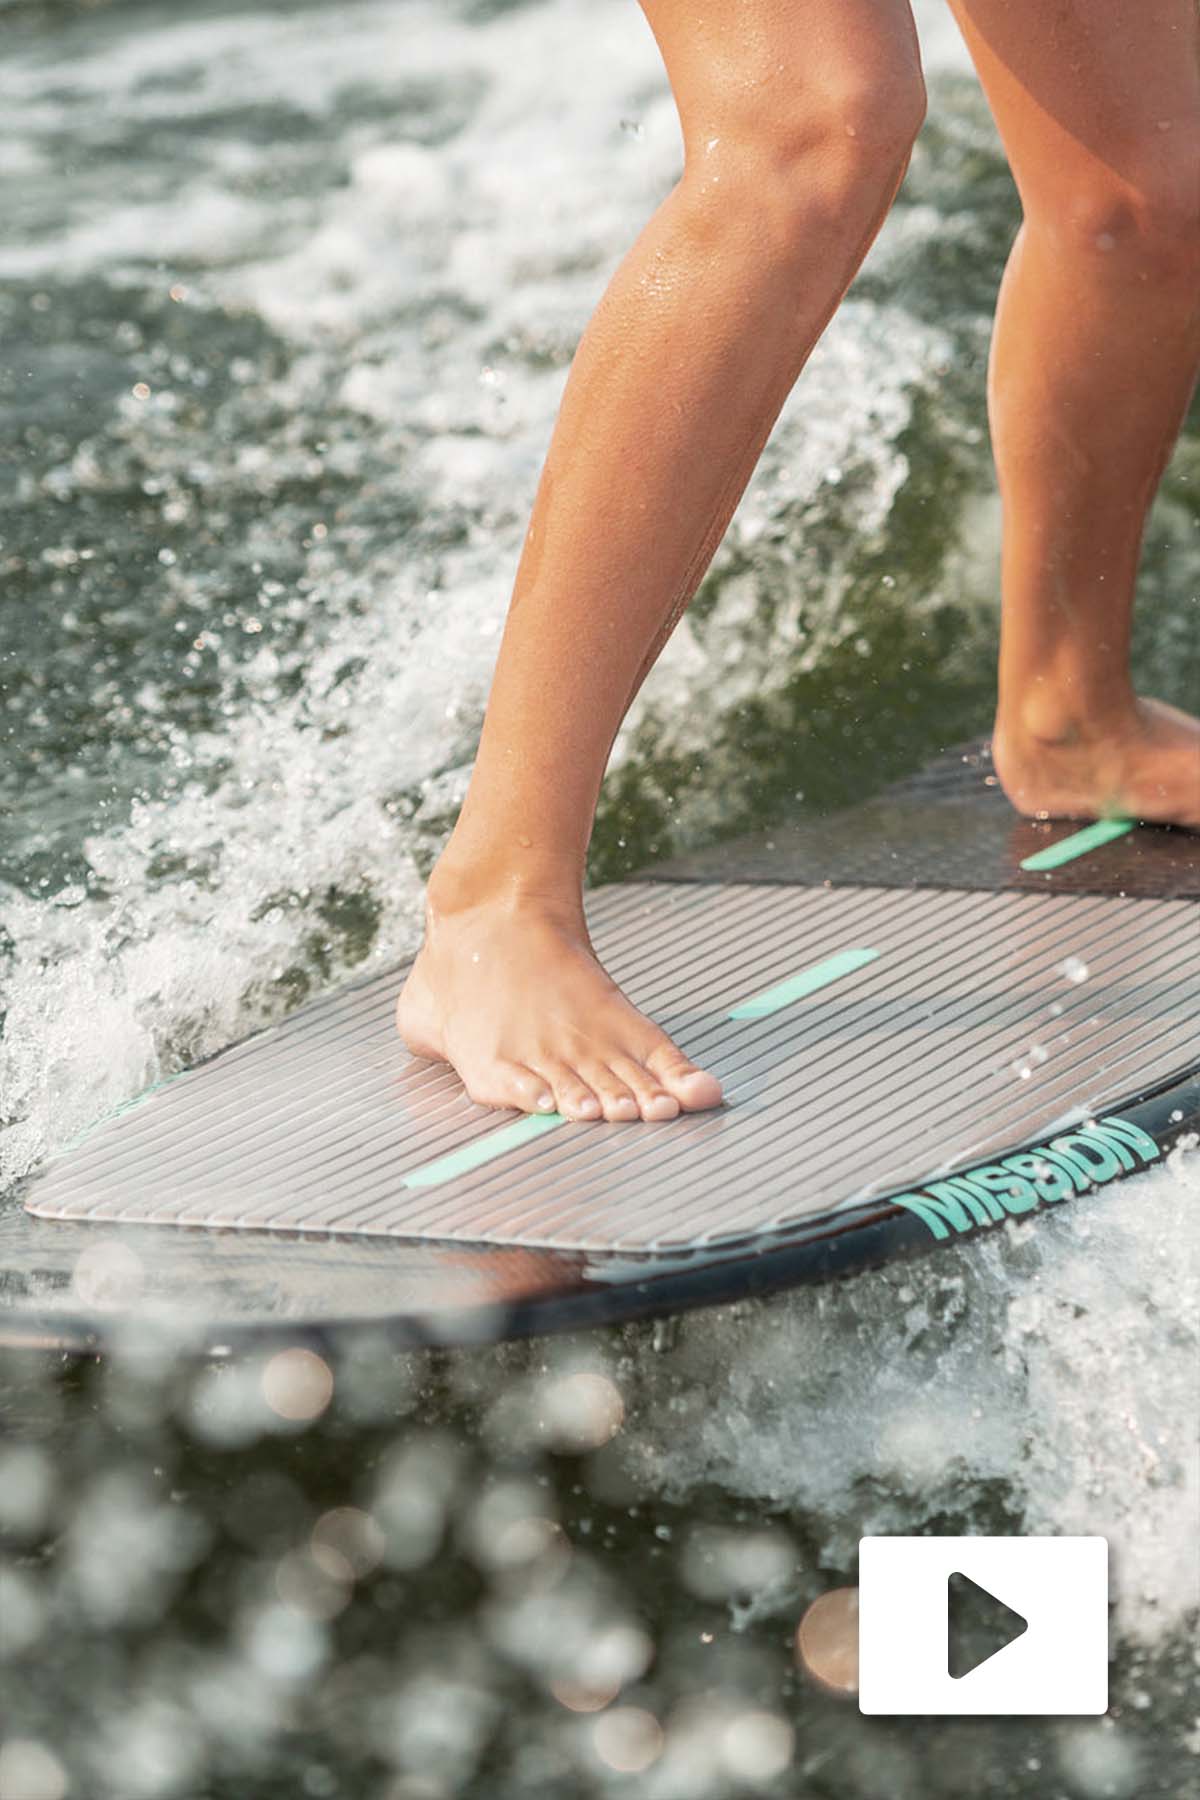 What Kind of Wakesurf Board Should You Get?